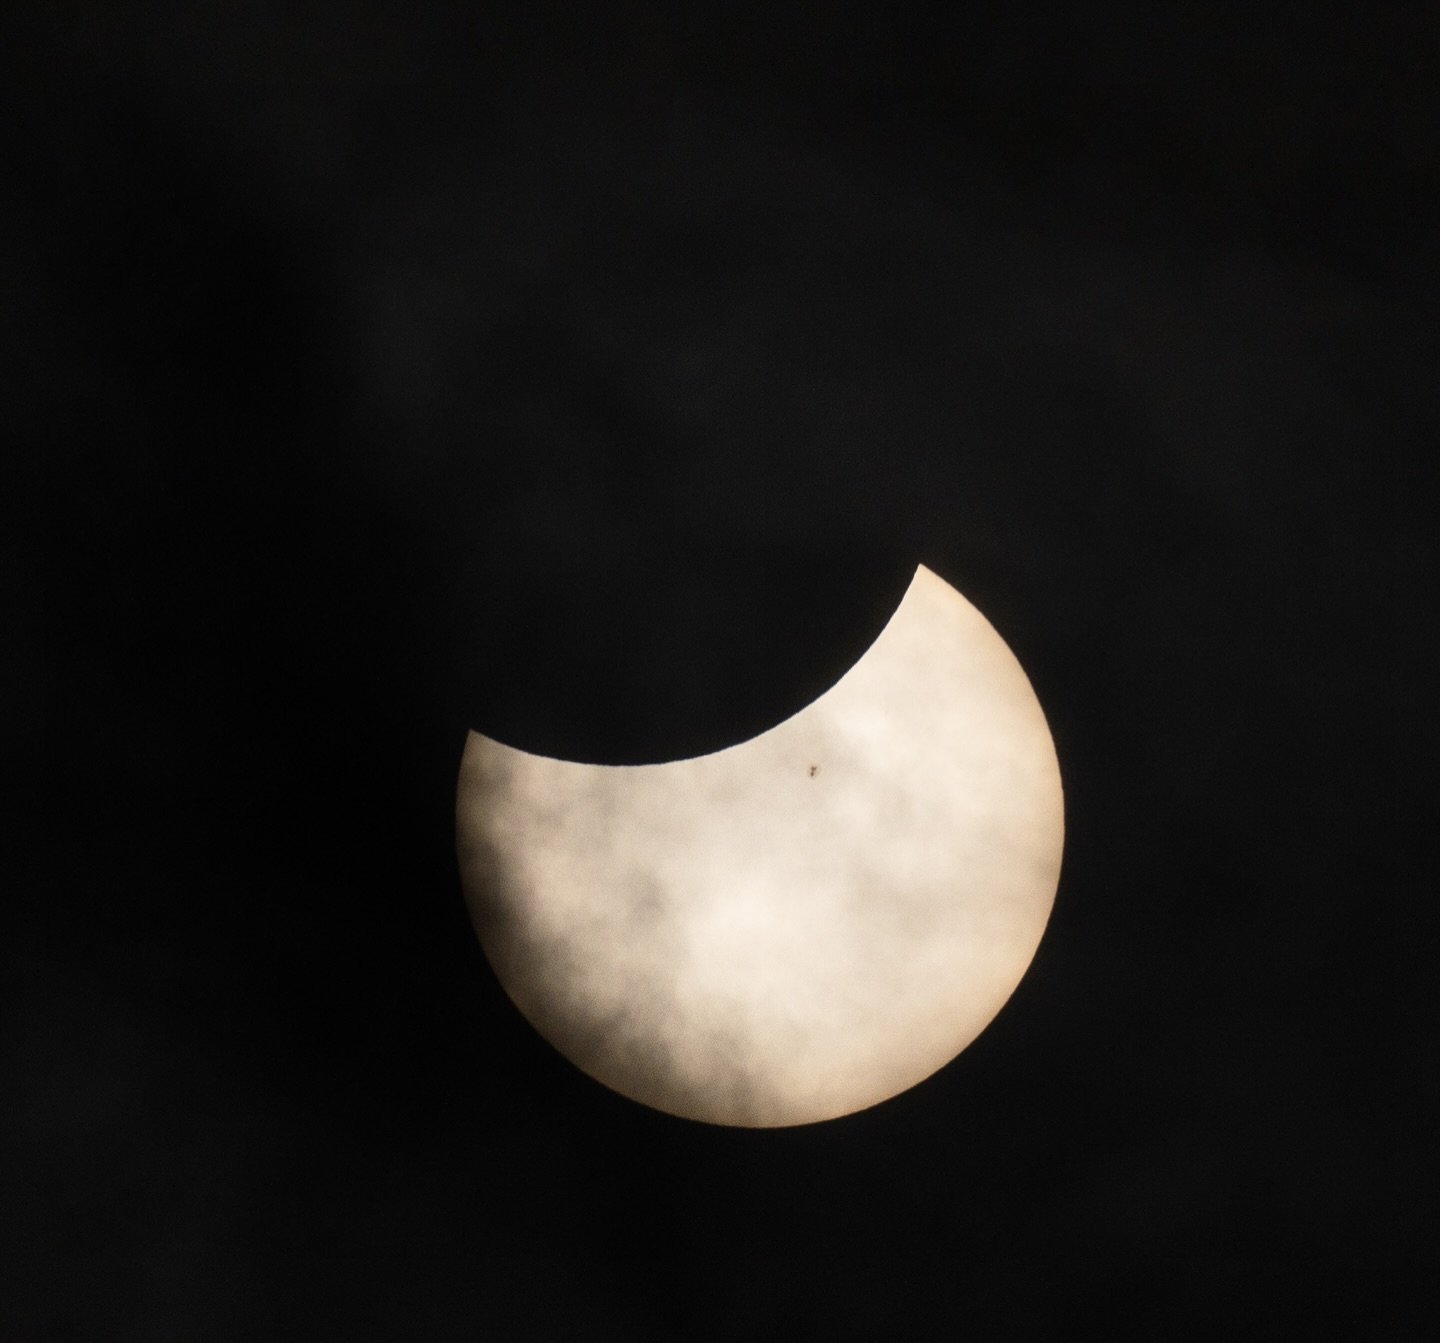 Those pesky clouds stepped aside to give us a little glimpse of the drama. #eclipse #lavenderlanemedia #quintewest